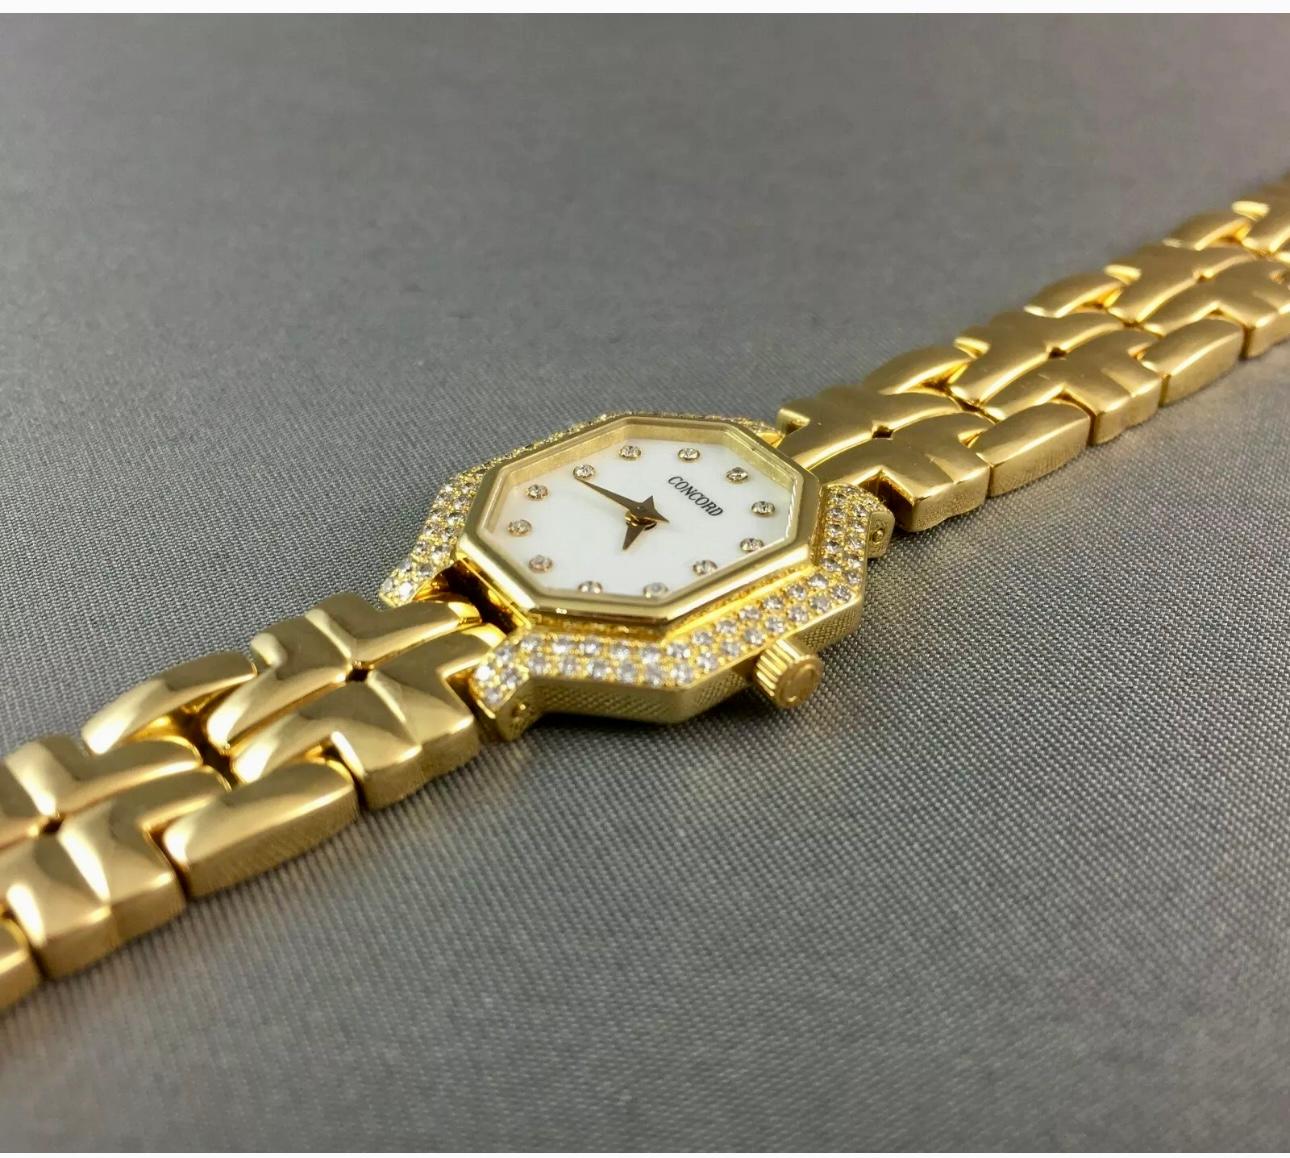 Concord 18k Gold & Diamond Ladies Watch Ref. 51.25.160
Description / Condition: All watches have been professionally scrutinized and serviced prior to being offered for sale. 1.30 carats / diamonds. 
Gold Content:18k yellow gold, total gold weight